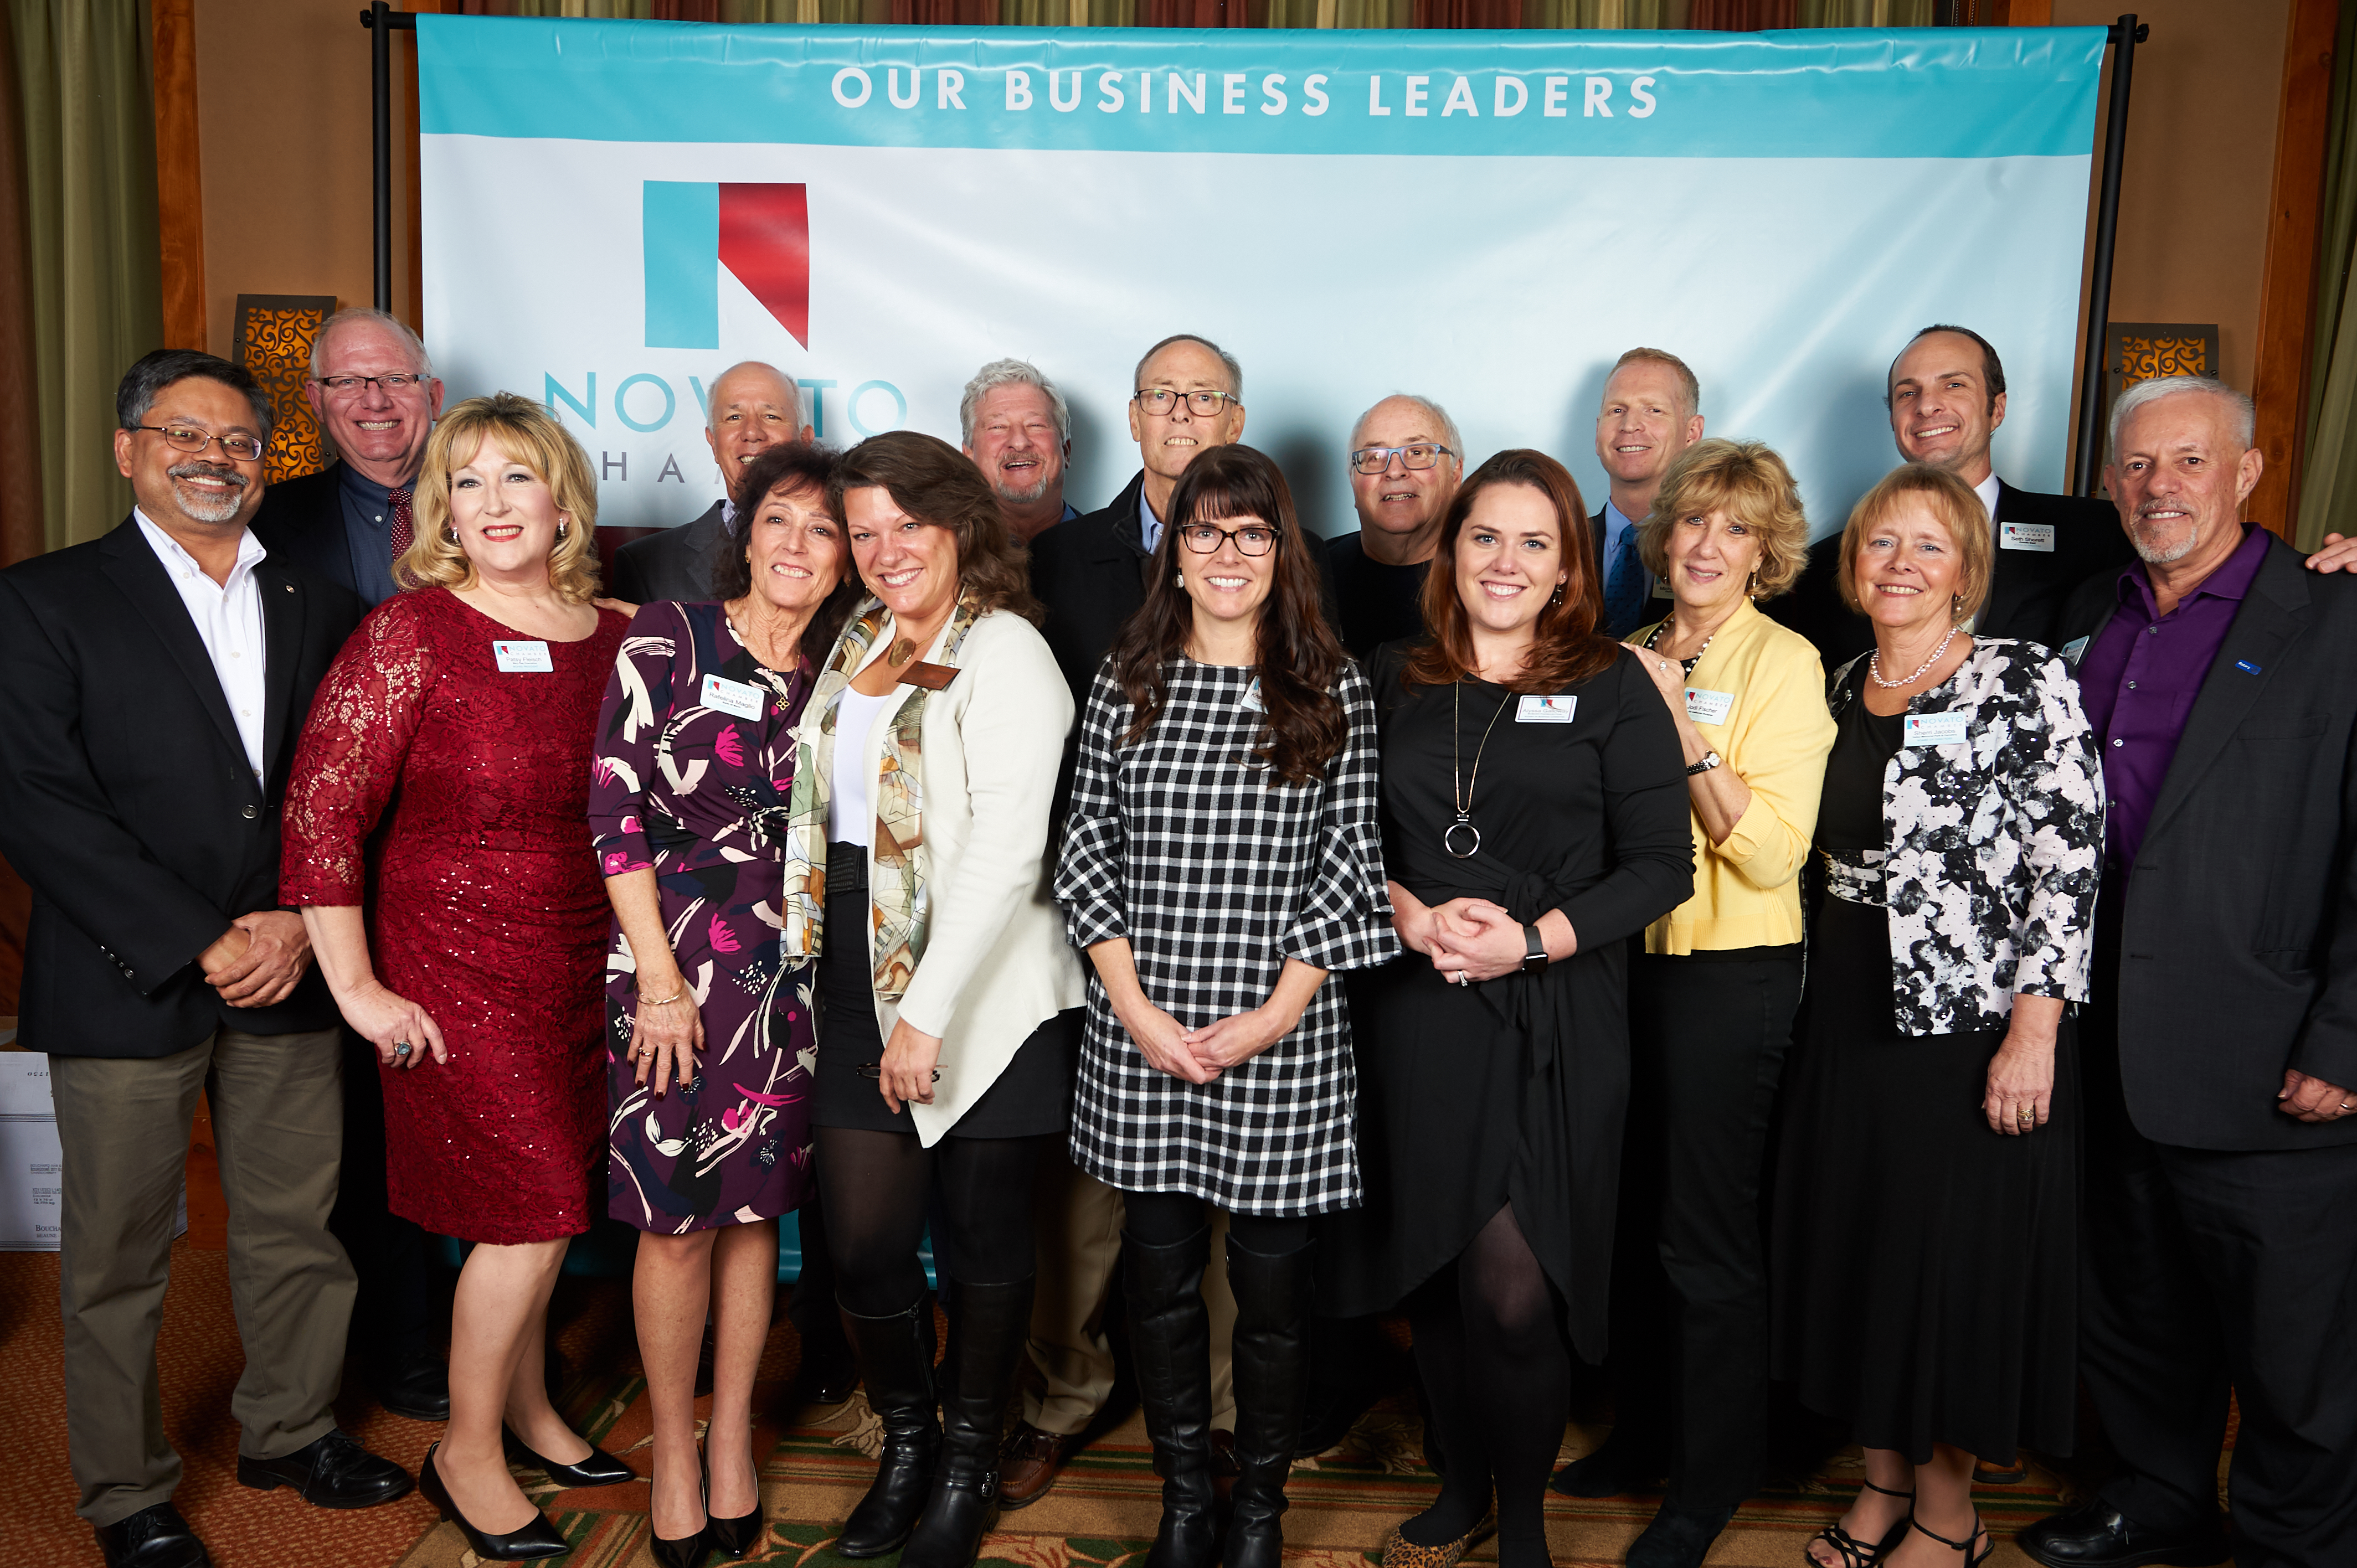 Board of NovatoChamber Chamber Leadership Honors Dinner Leaders President 2019 San Rafael Business Nonprofit Support Resources Succeed Businesses Economic Development Commission Control City COuncil